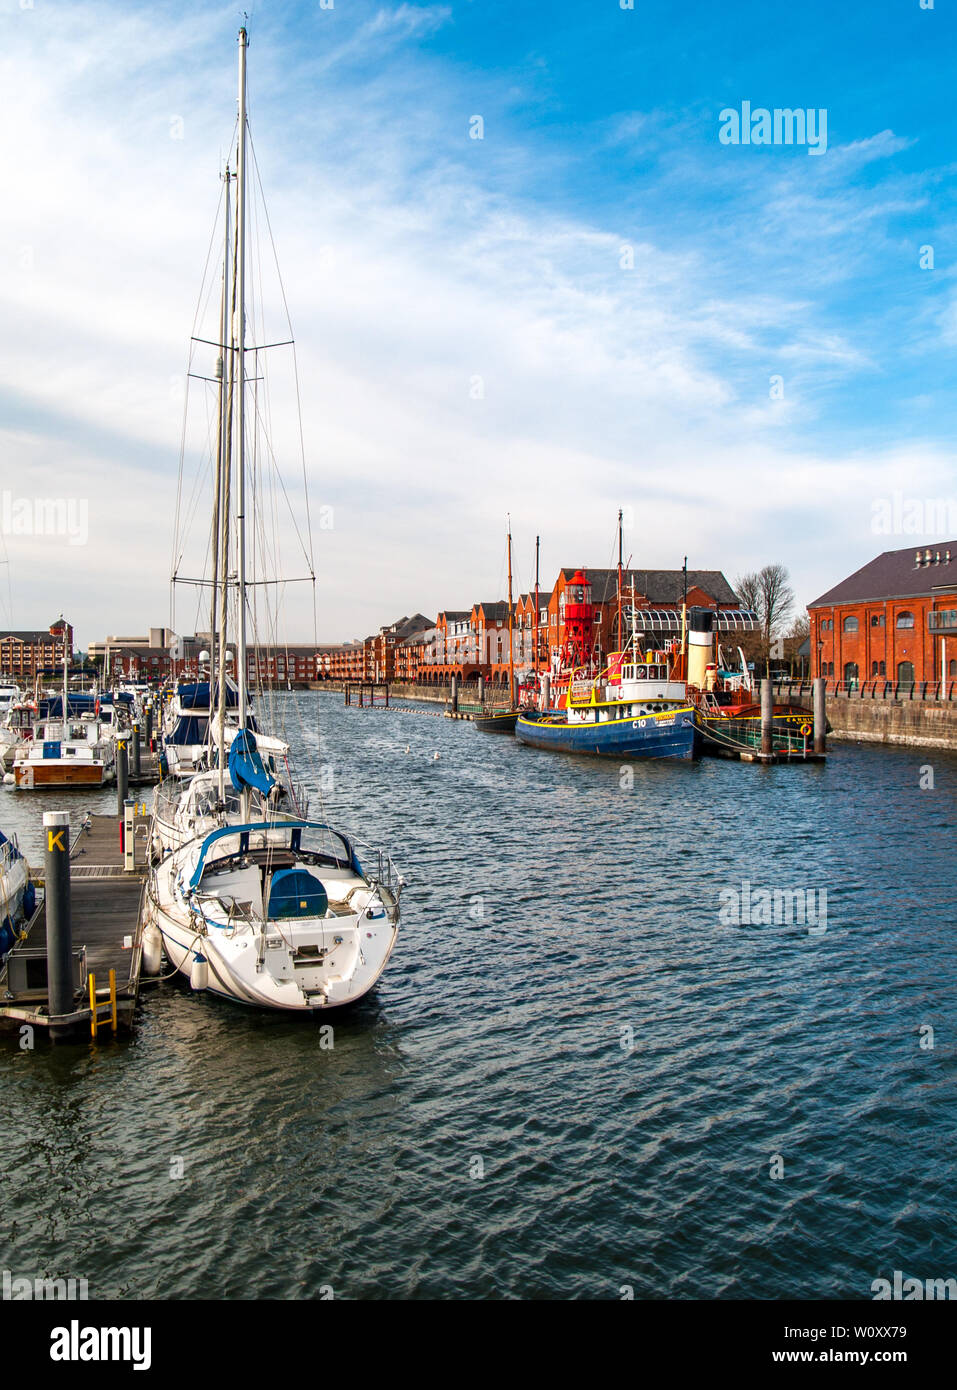 Boats, yachts and ships moored in Swansea Marina. Looking towards the National Waterfront Museum. Swansea, Wales, UK. Stock Photo